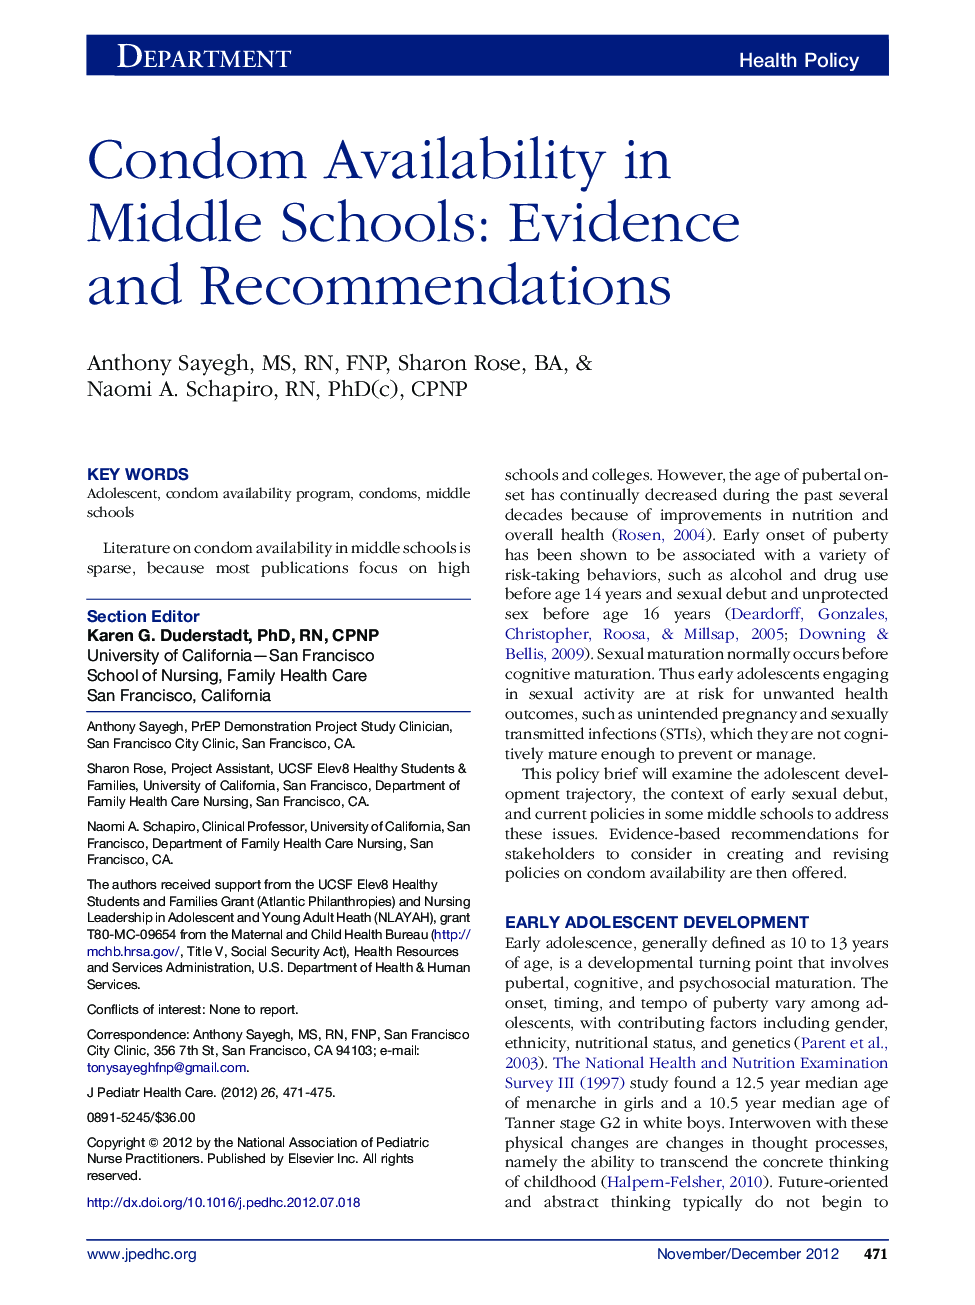 Condom Availability in Middle Schools: Evidence and Recommendations